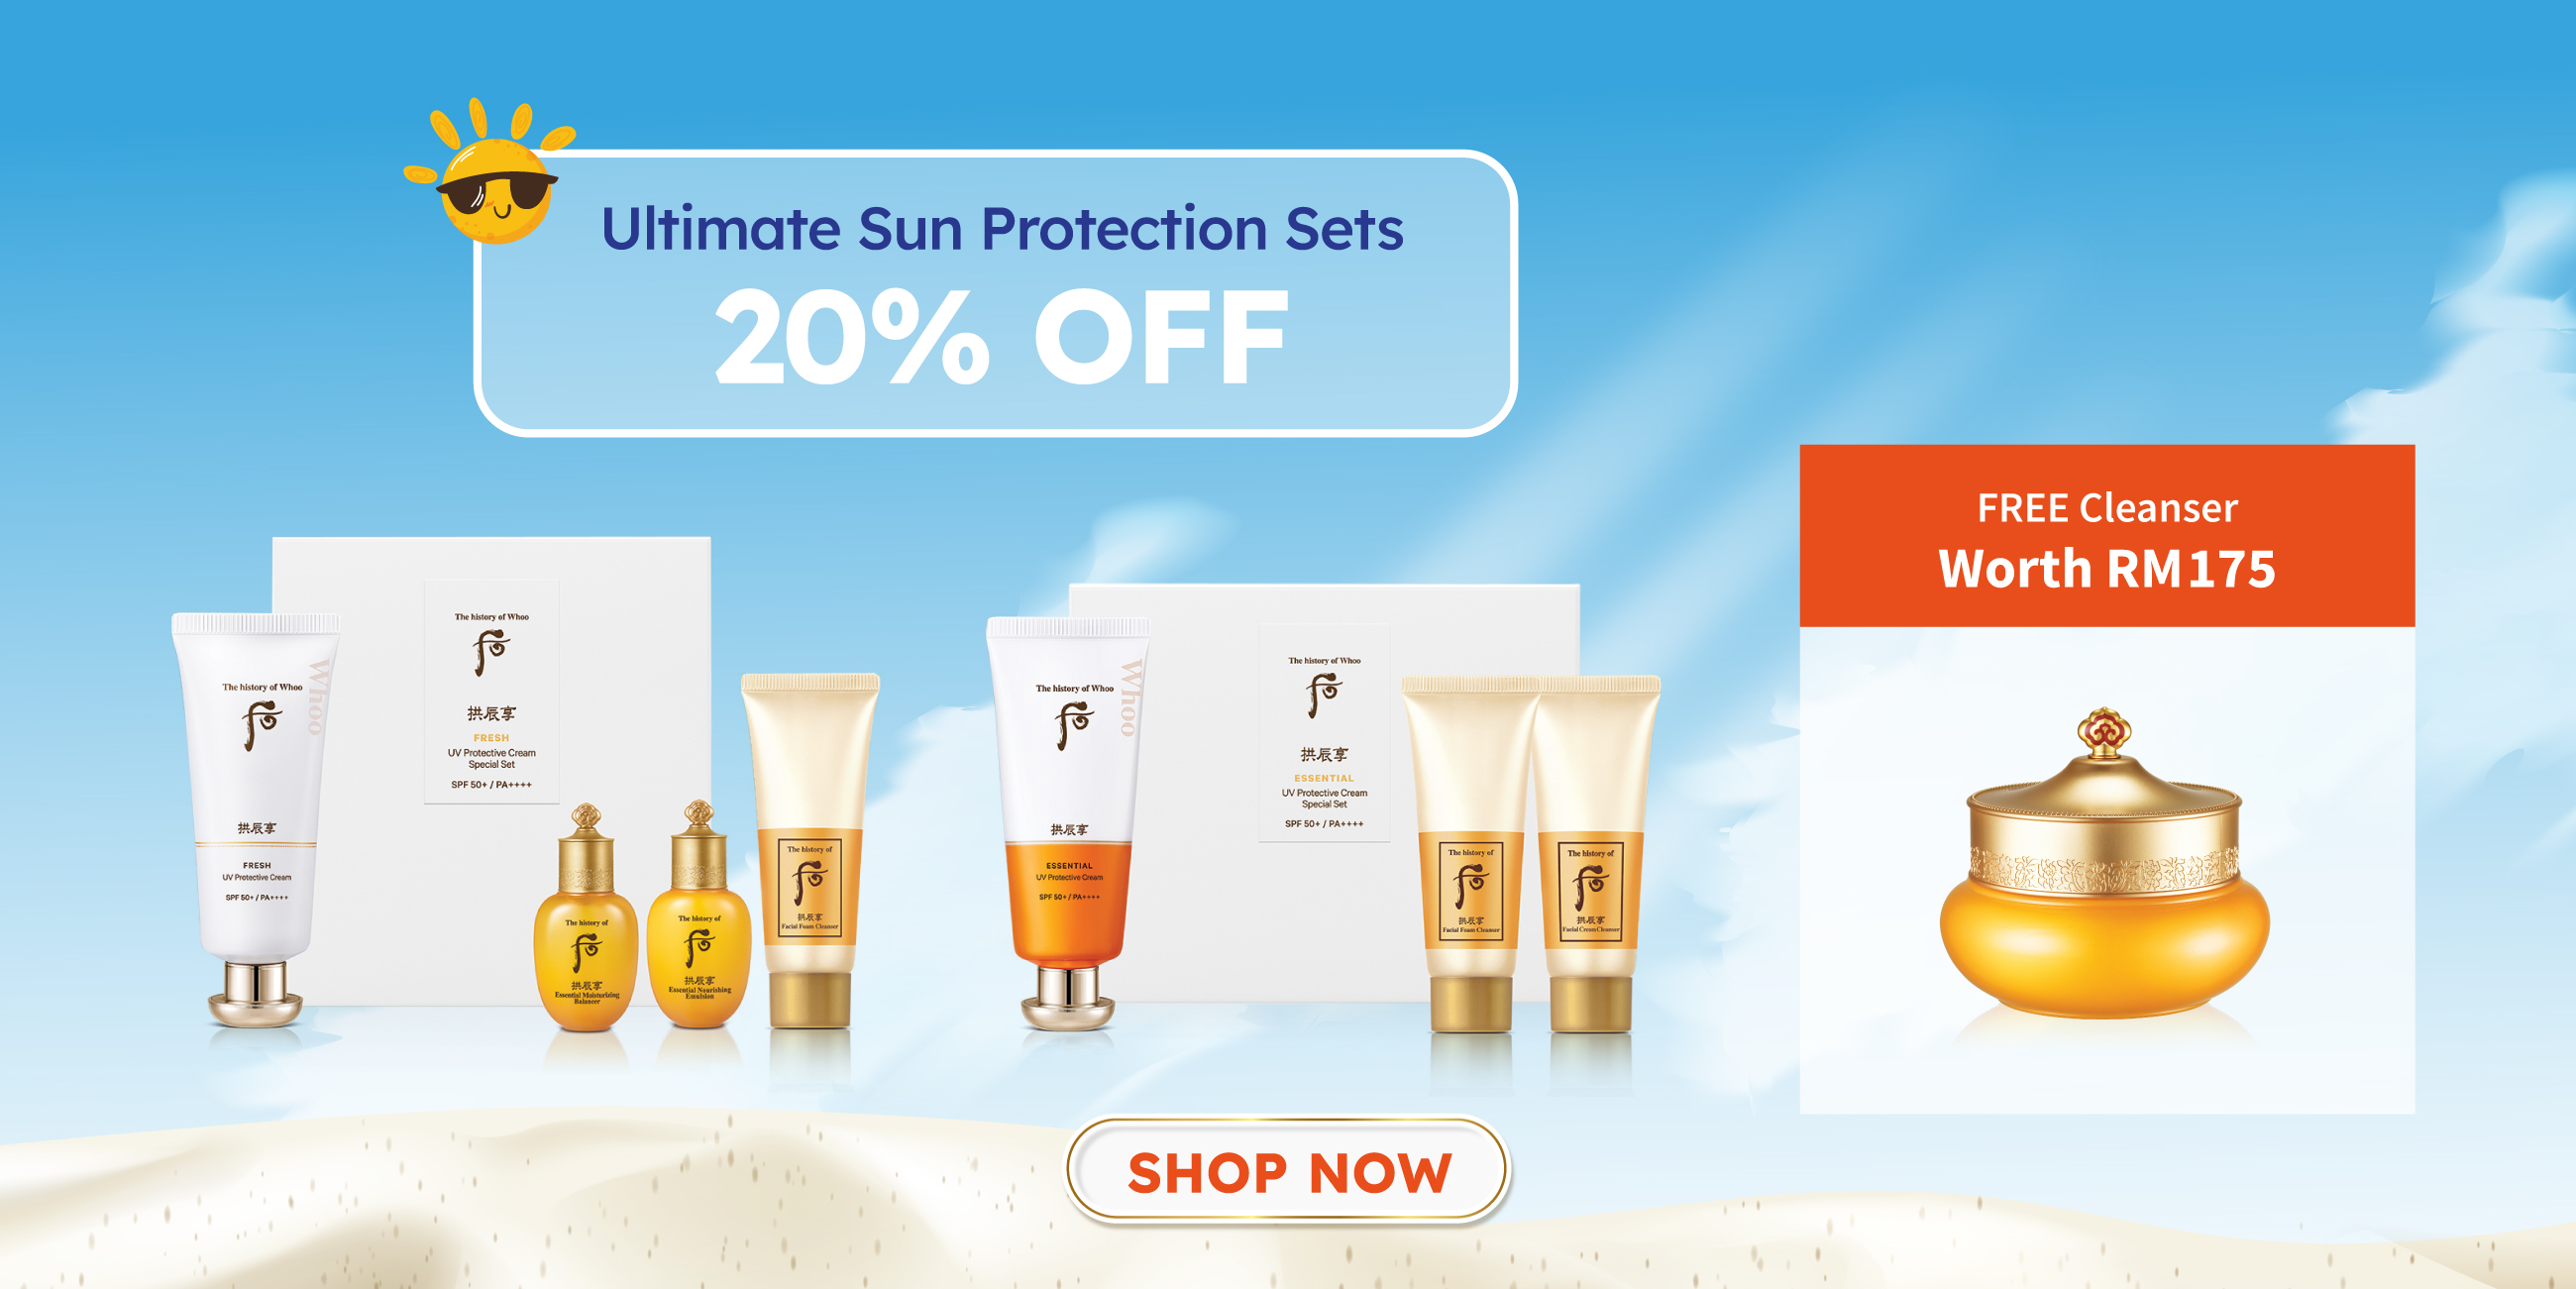 Ultimate Sun Protection Sets at 20% Off + Free Cleanser